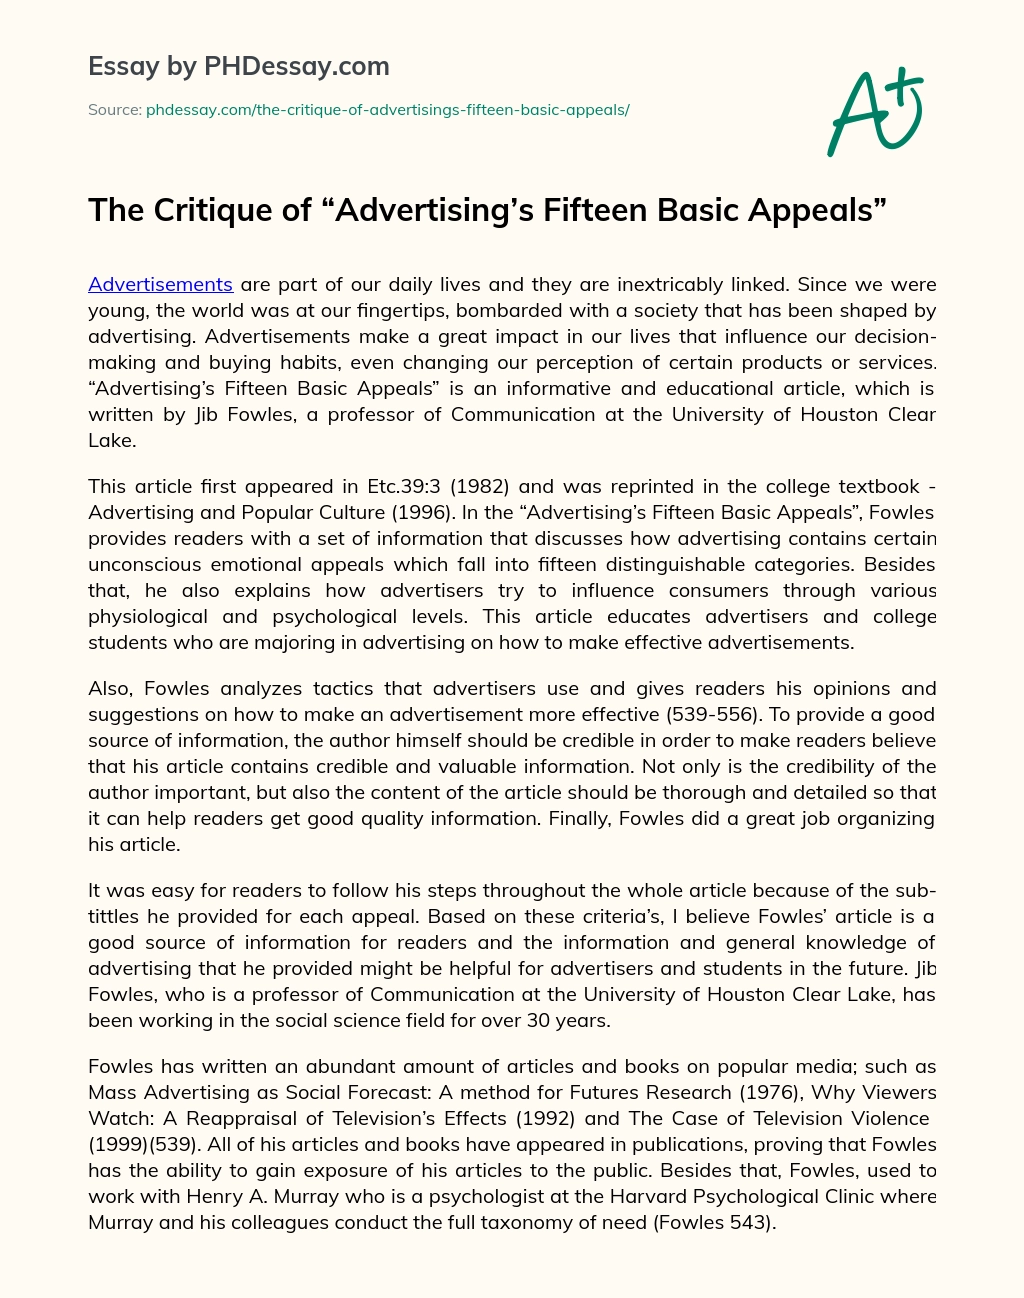 The Critique of “Advertising’s Fifteen Basic Appeals” essay